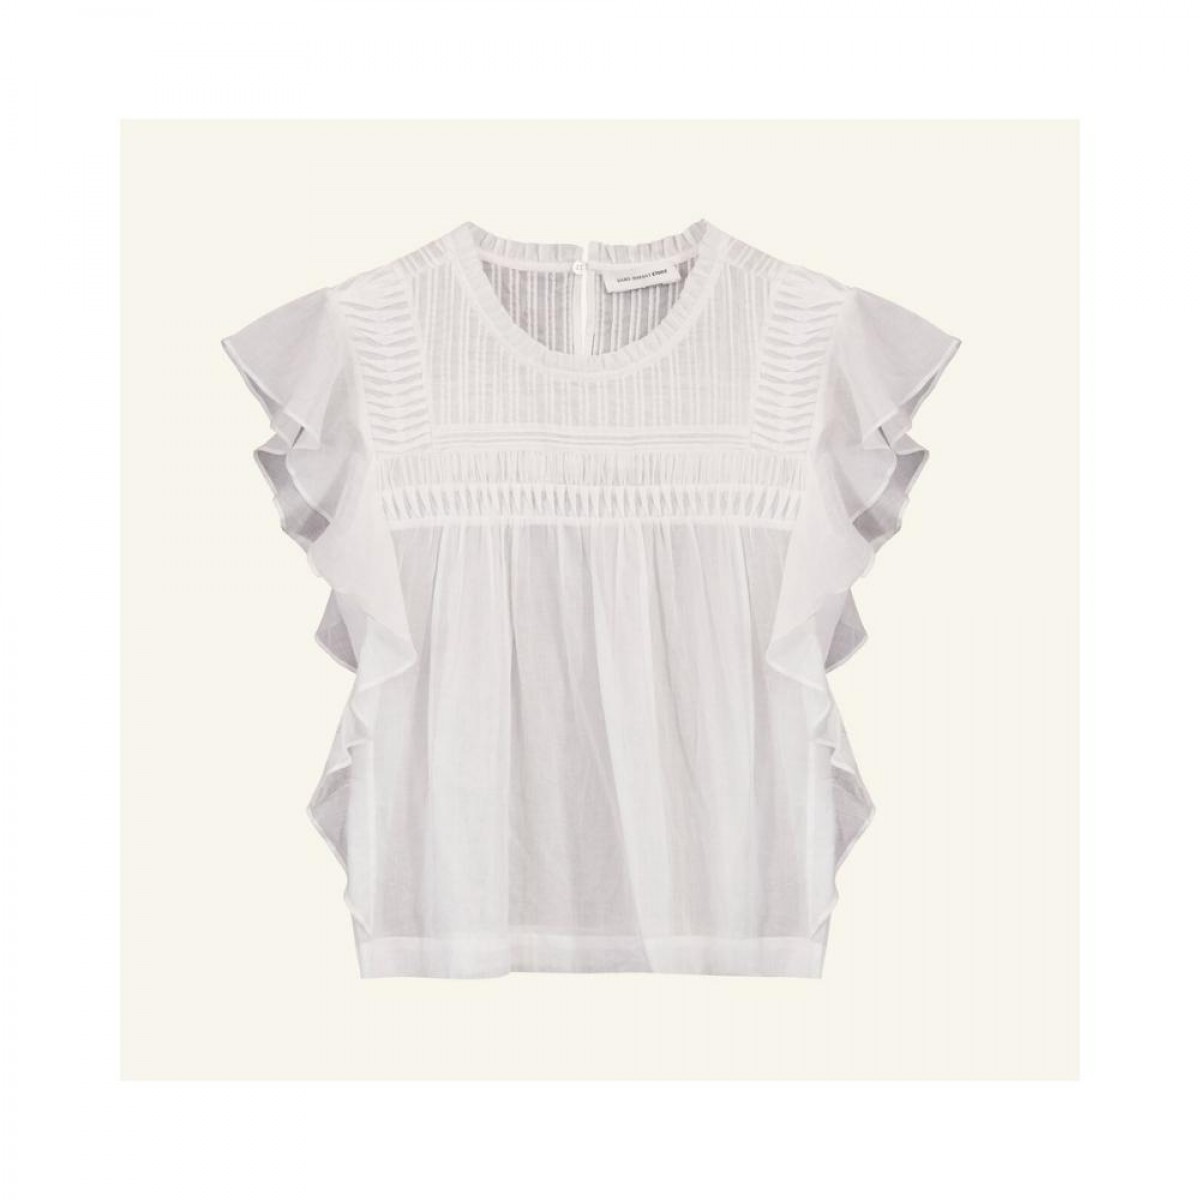 layona top - white - front